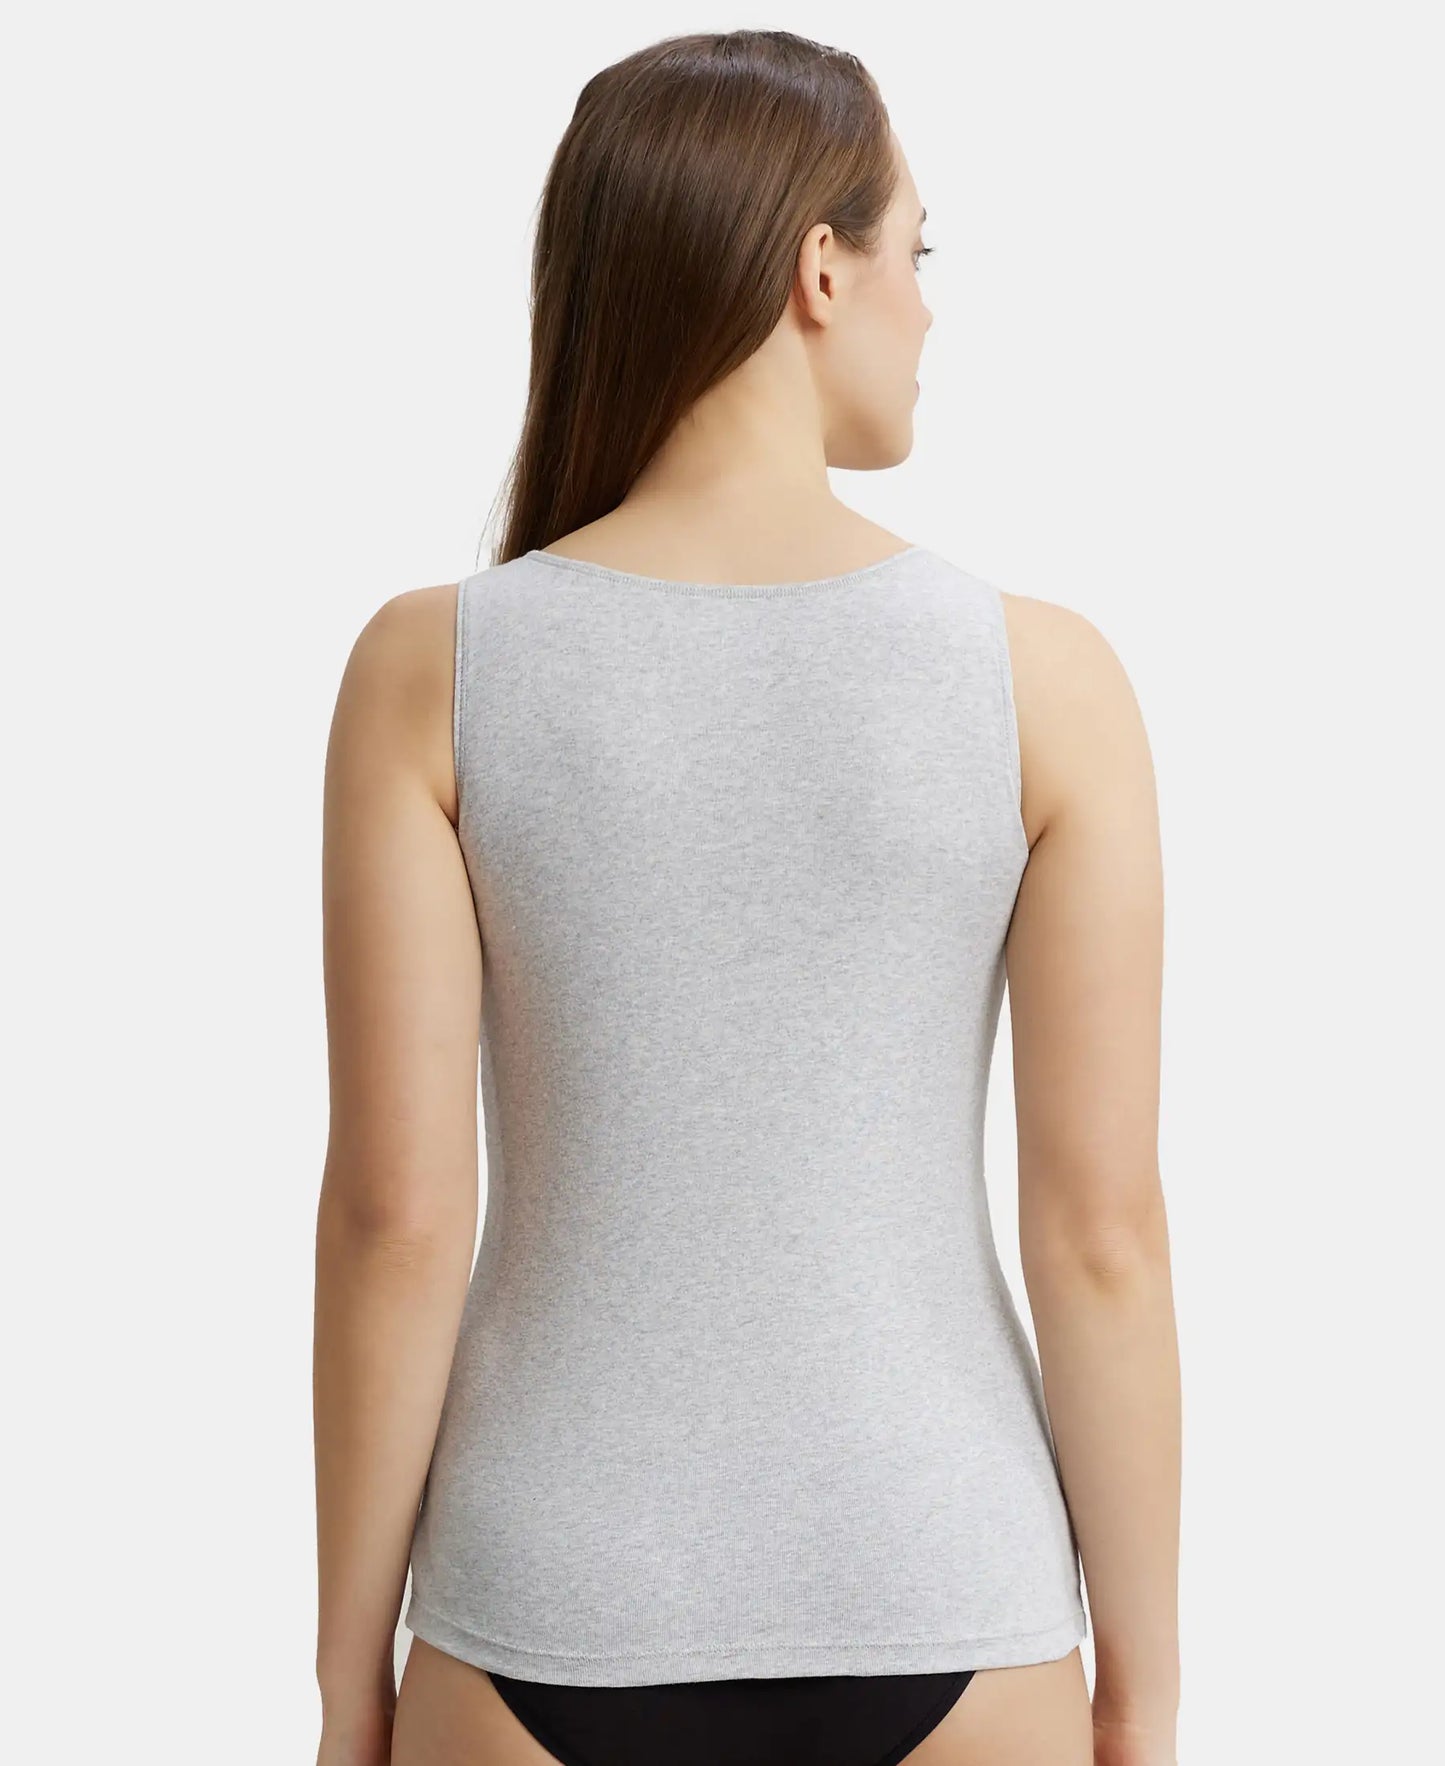 Super Combed Cotton Rib Fabric Inner Tank Top With StayFresh Treatment - Steel Grey Melange-3